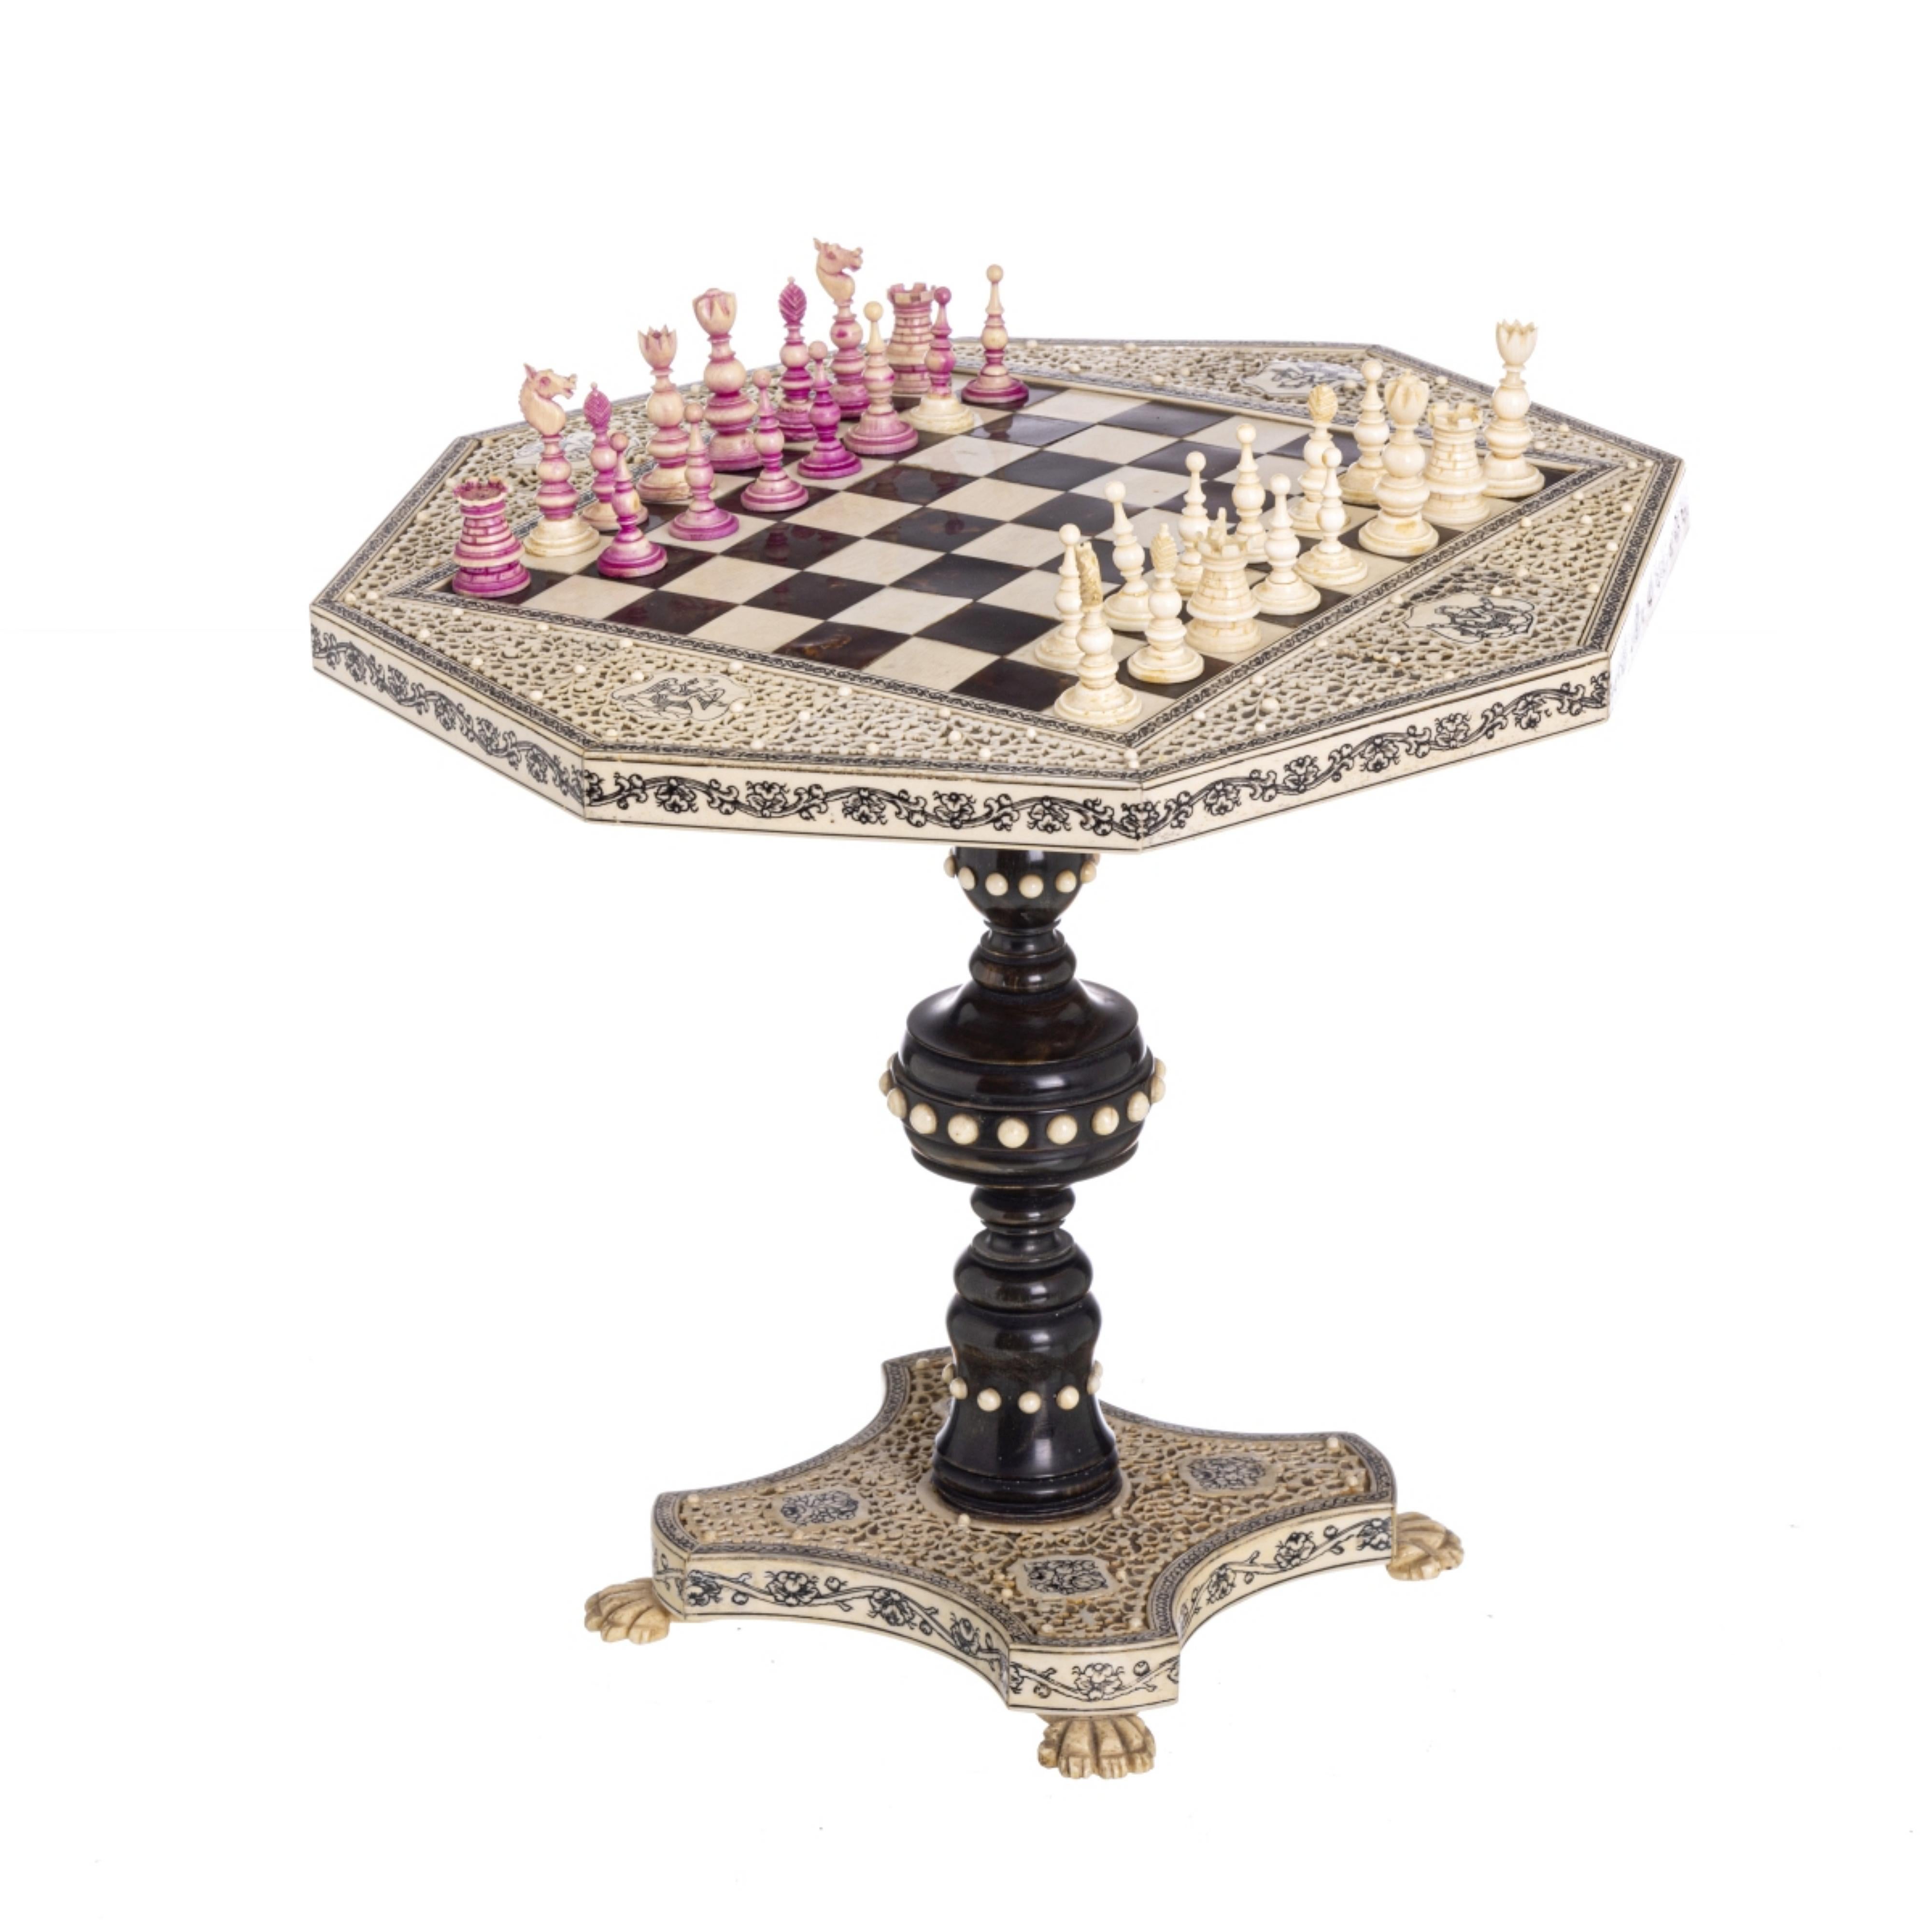 Wood MINIATURE GAME TABLE WITH CHESS PIECES  19th Century Anglo-Indian  For Sale